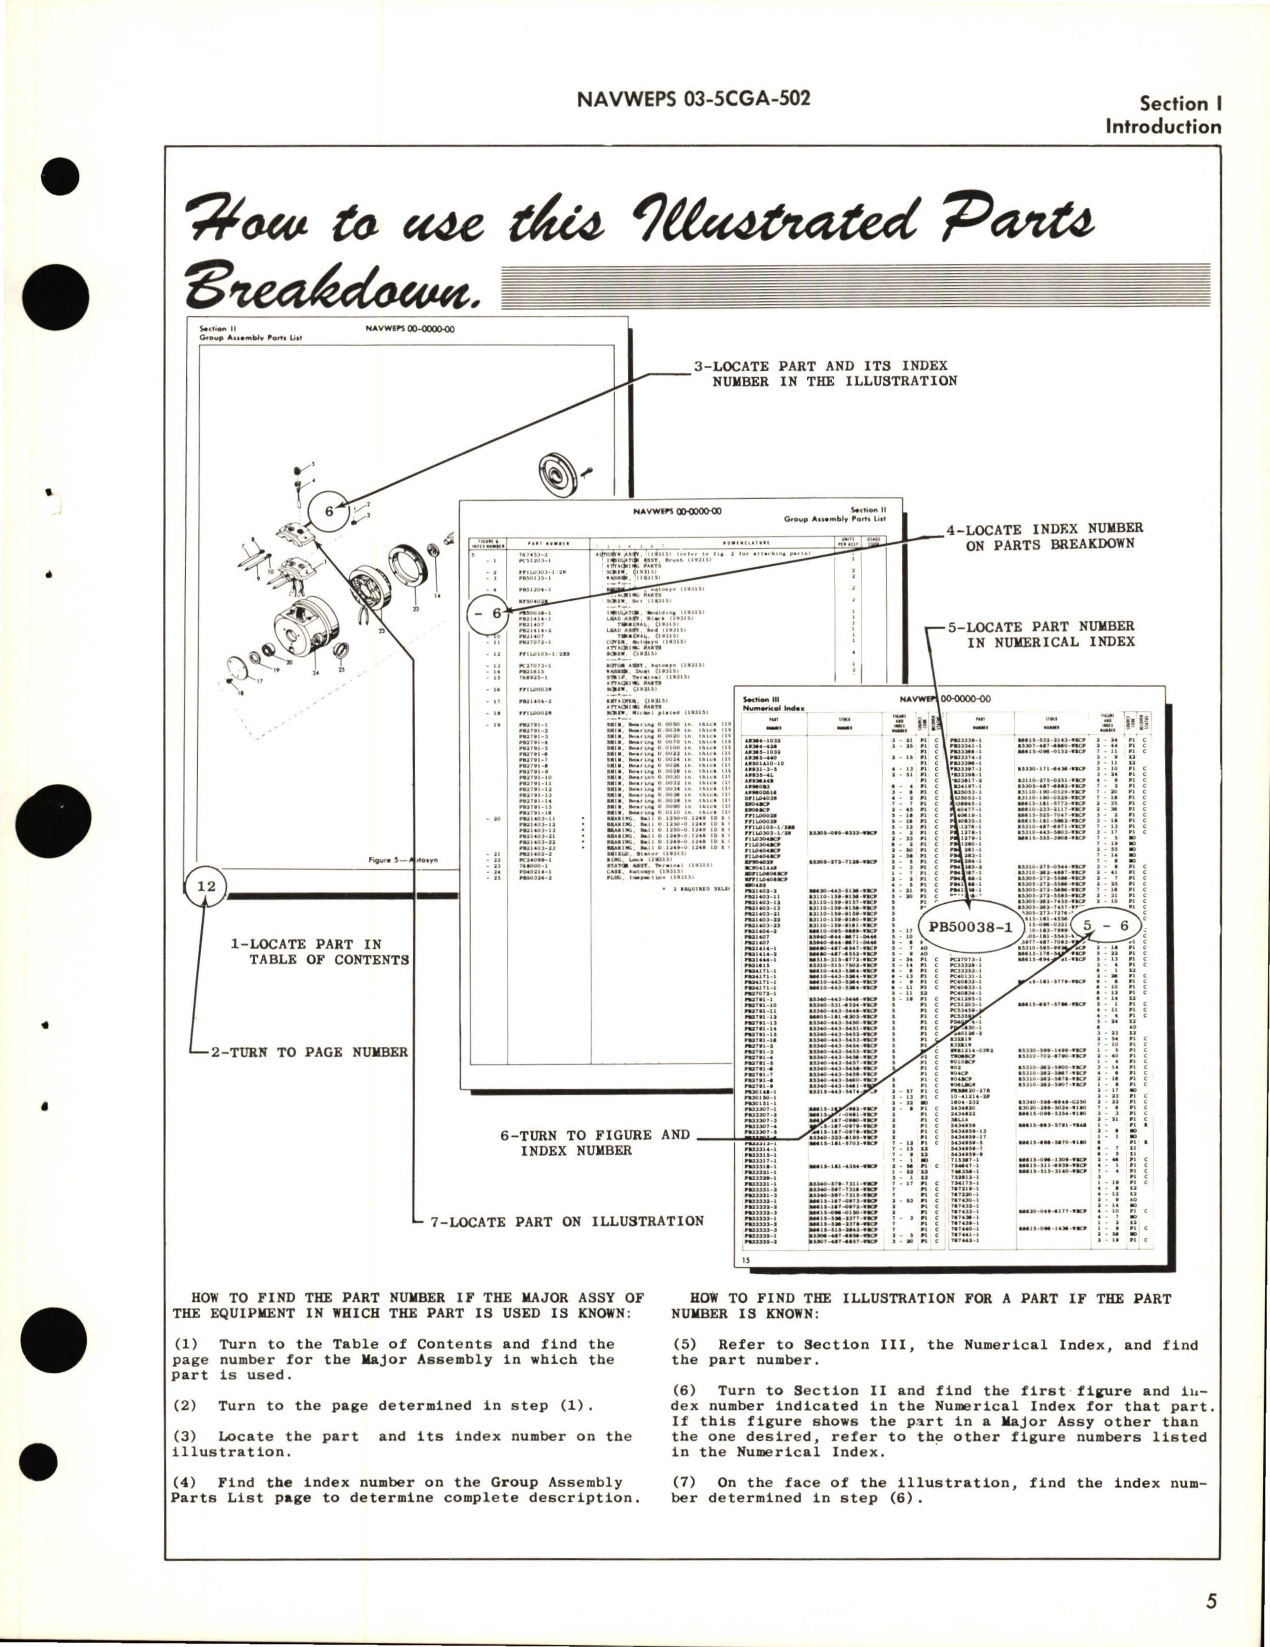 Sample page 7 from AirCorps Library document: Parts Breakdown for Horizontal Stabilizer Actuator - 5380824 and 5660533 Series 